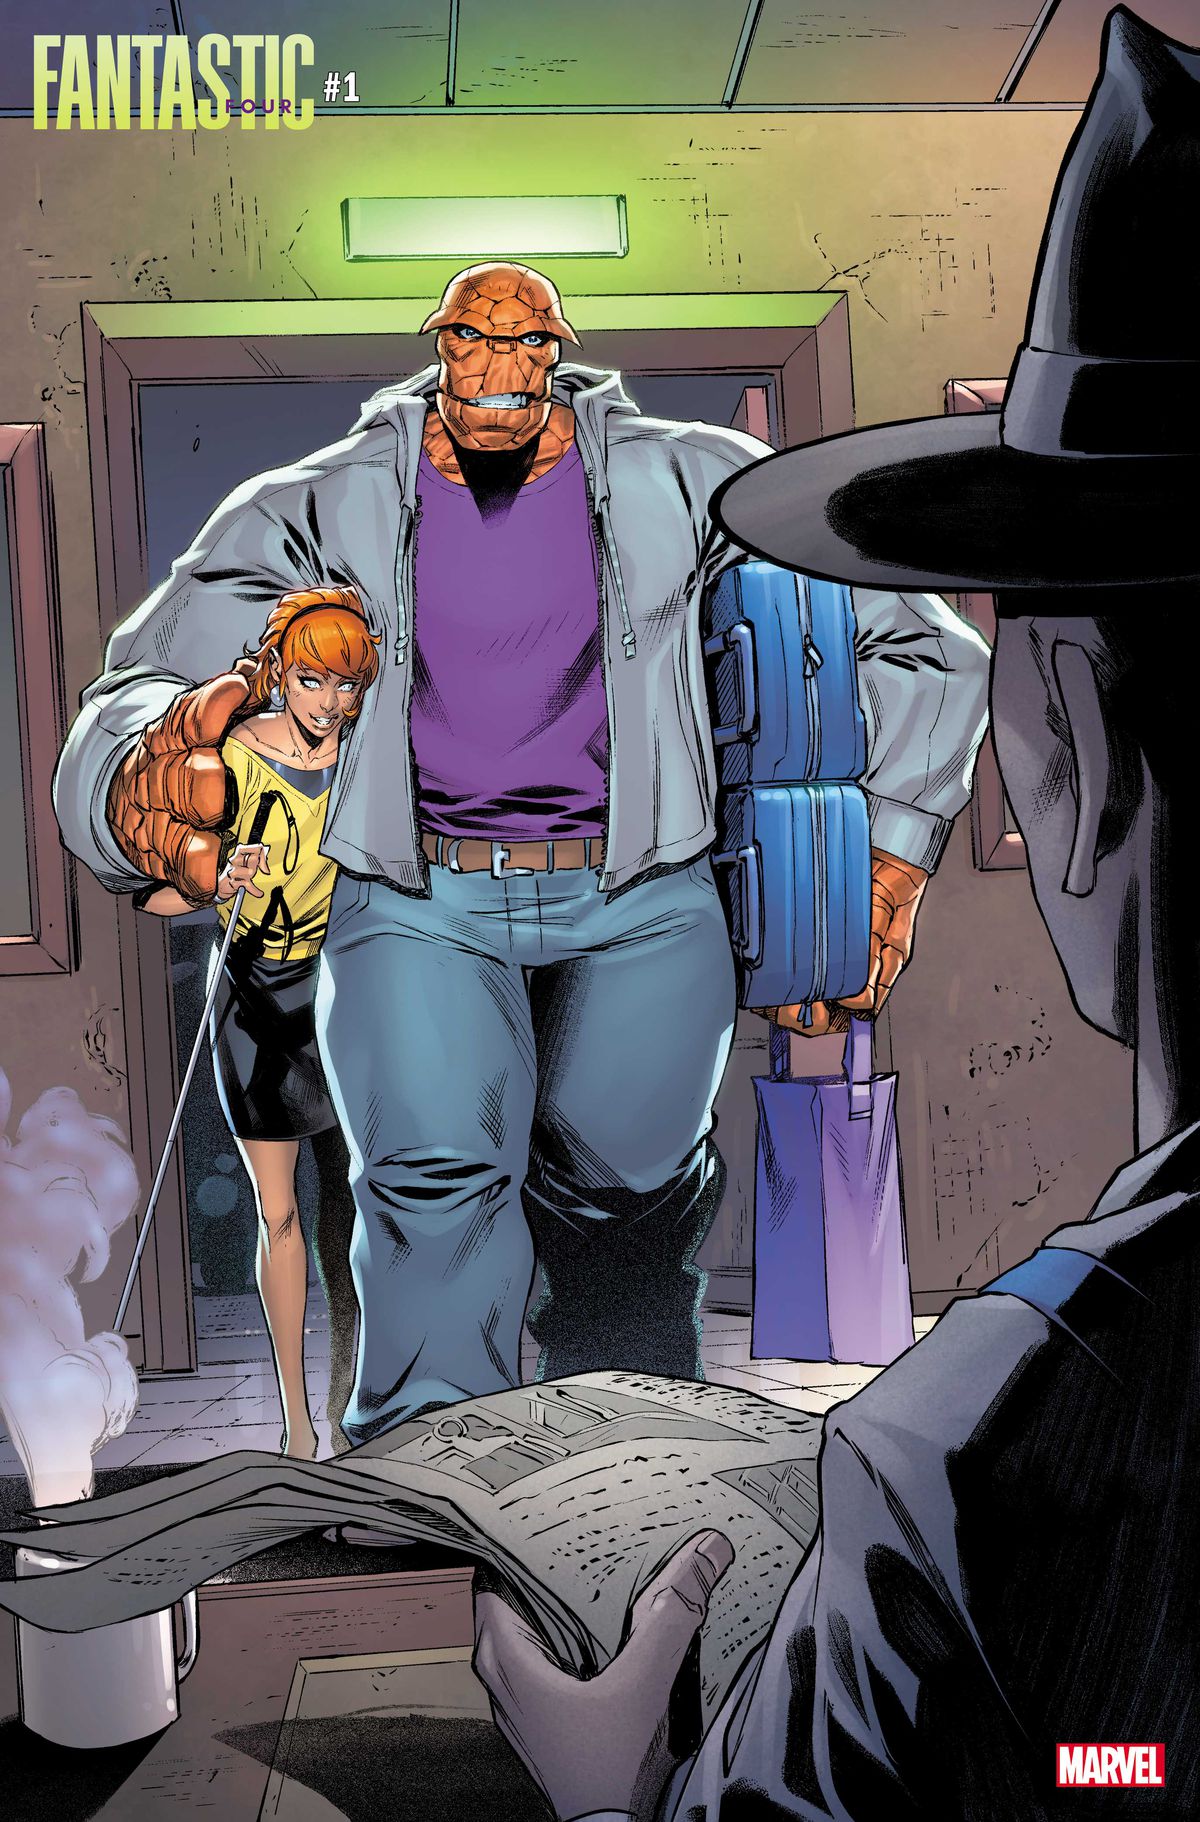 Ben Grimm and Alicia masters walk into a motel in Fantastic Four #1 (2022). Ben is carrying a superhuman number of suitcases under one arm. 